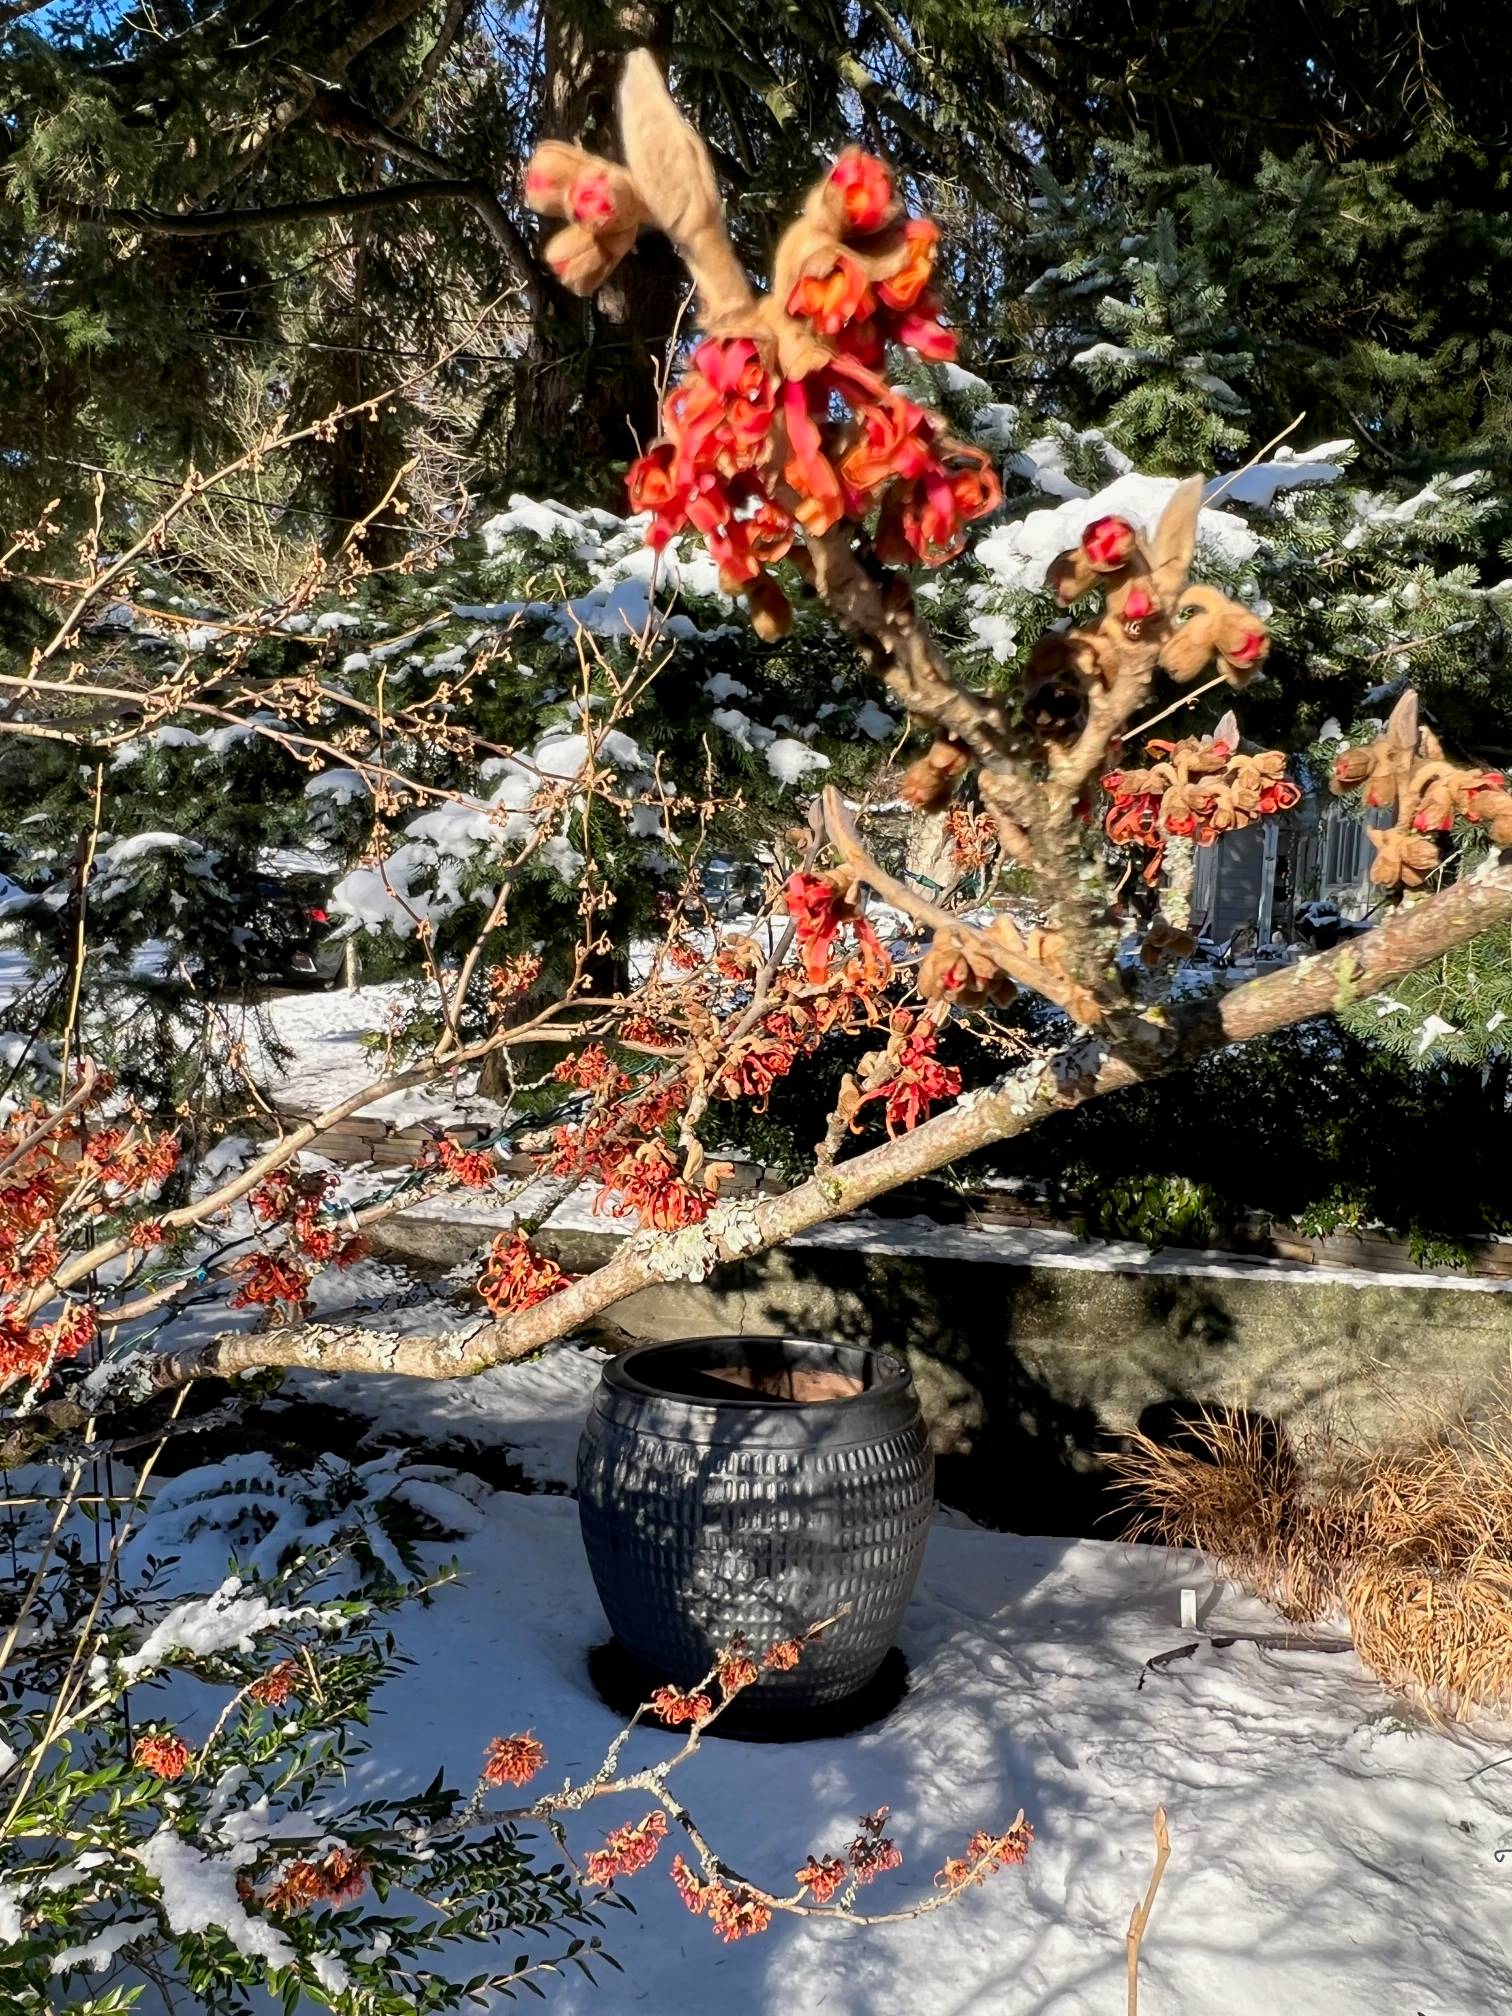 Witch hazel ‘Jelena’ blooming in recent snowfall